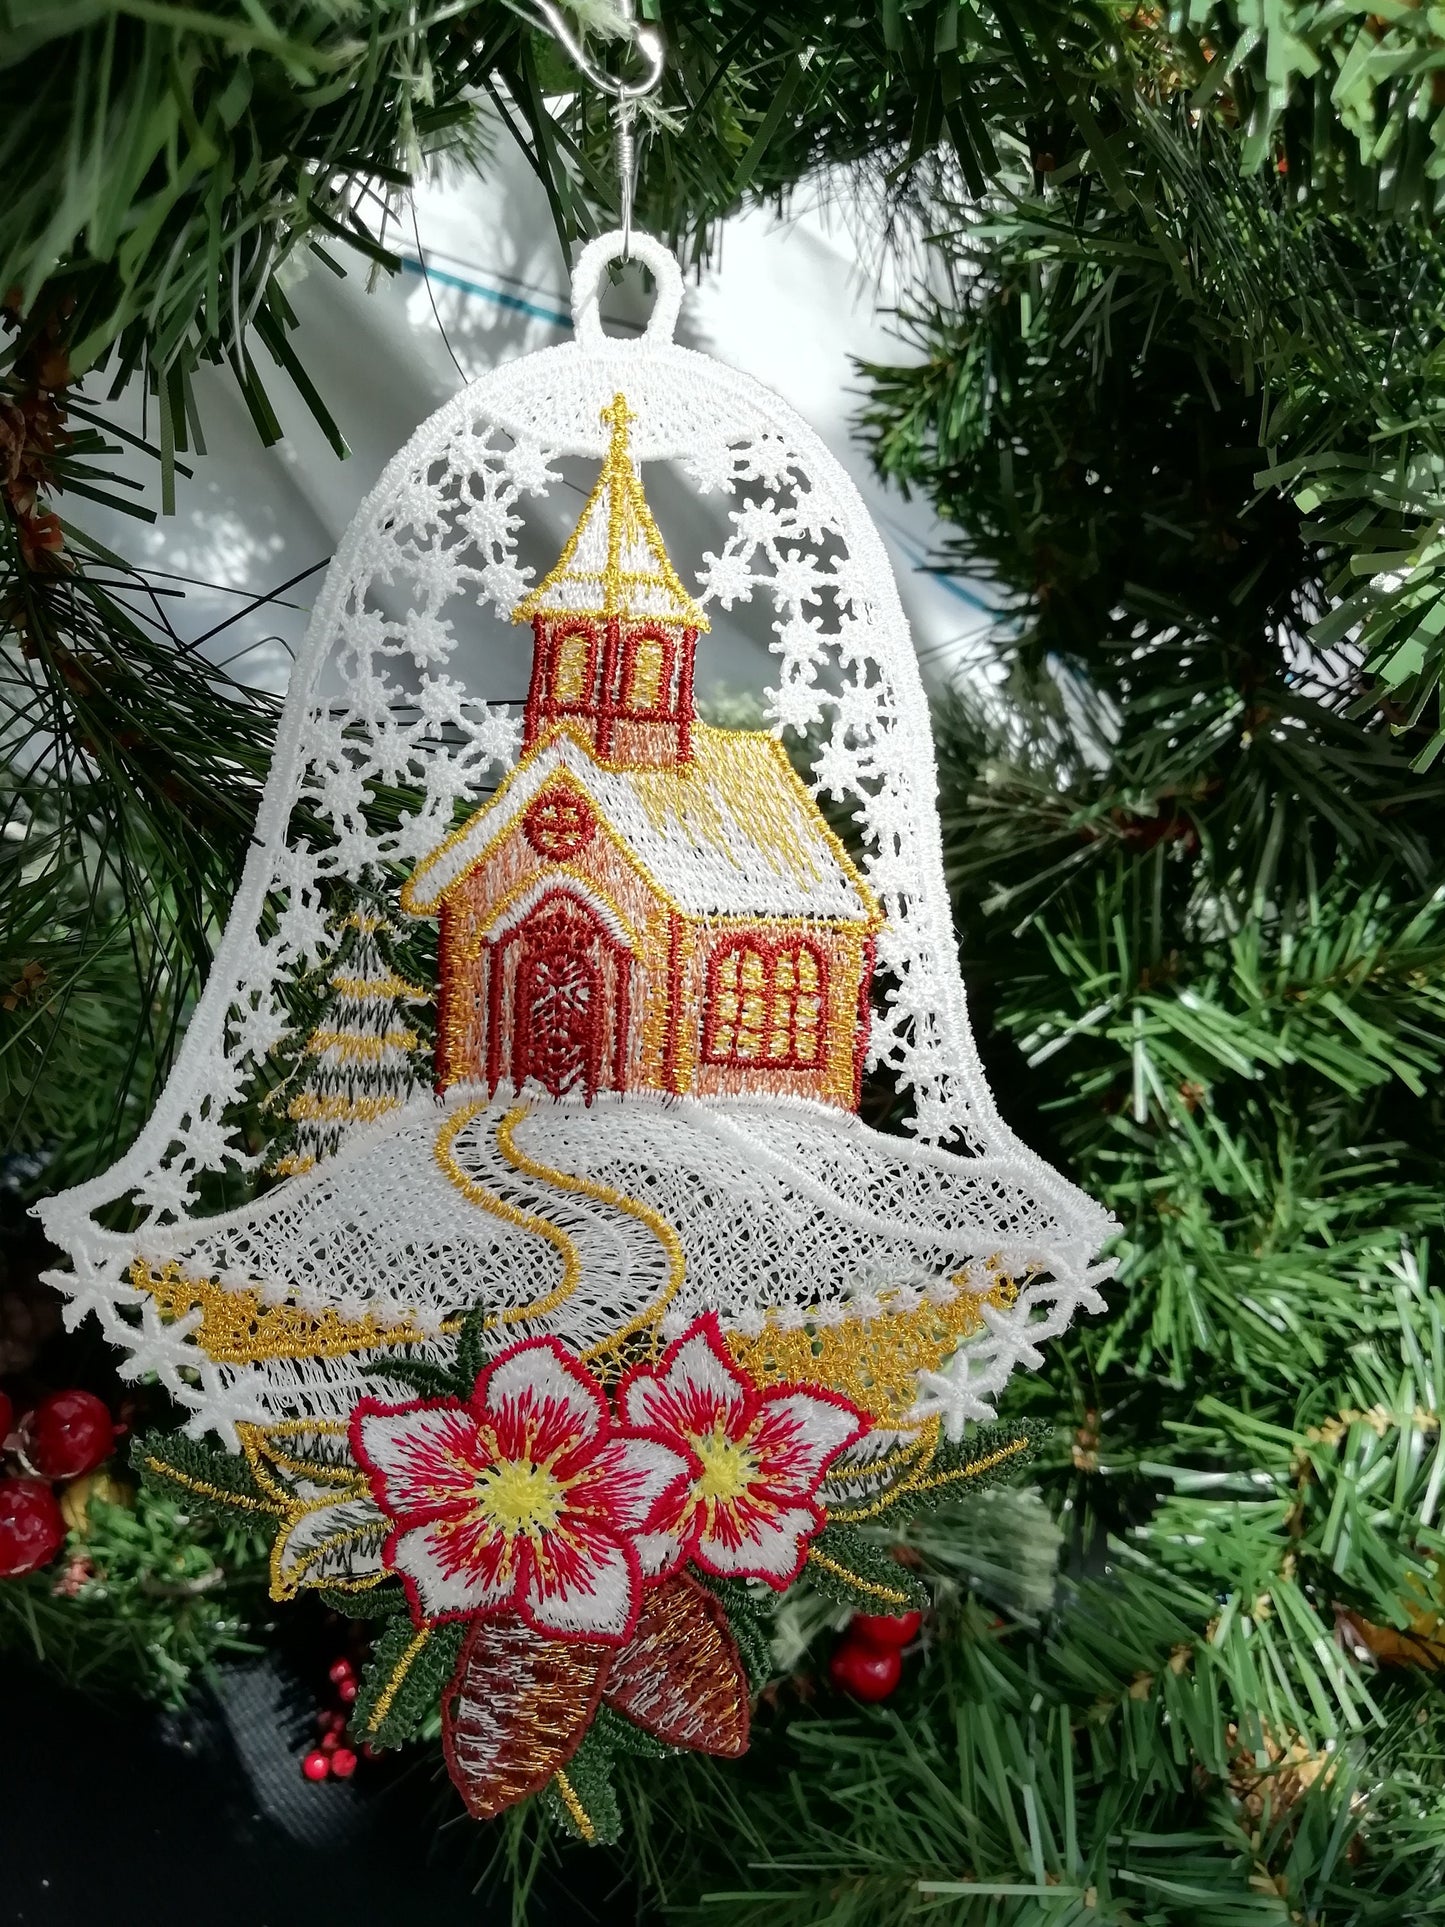 Christmas Bell, Church Bell, Free standing lace, Church decoration, Christmas decoration, Home decoration, Care Home decoration, Nursery